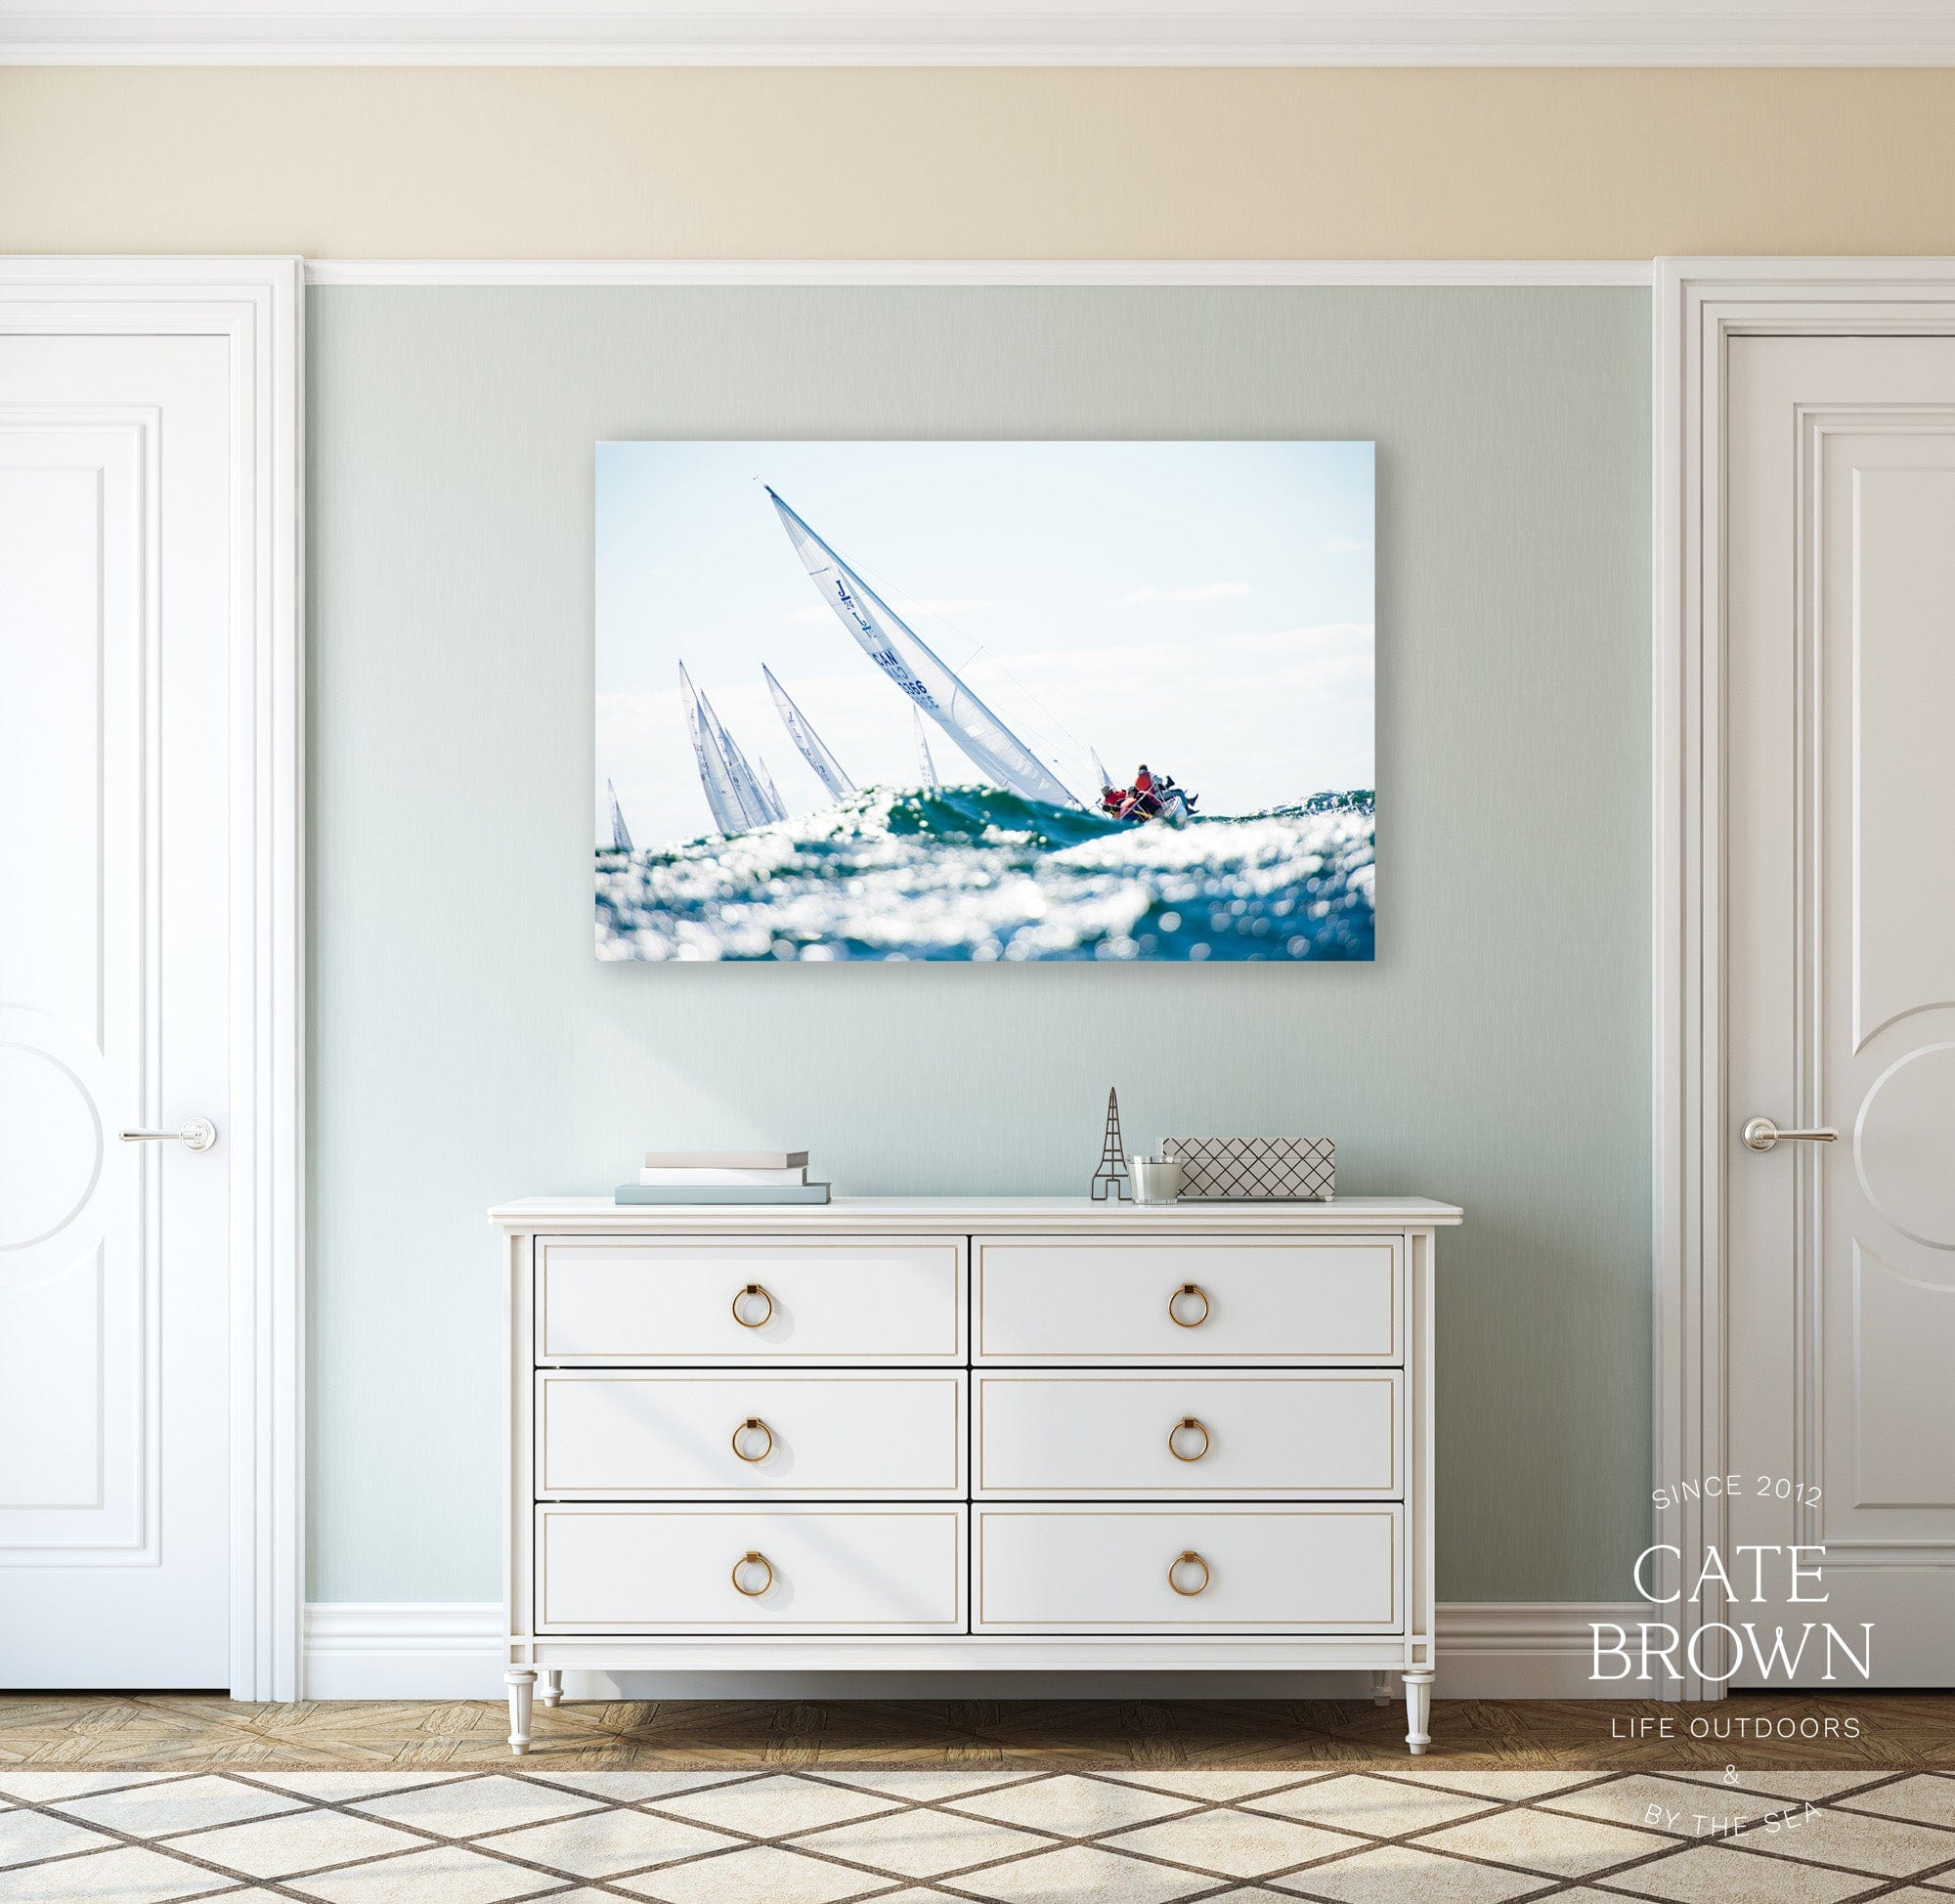 Cate Brown Photo Canvas / 16"x24" / None (Print Only) J24s Rolling  //  Nautical Photography Made to Order Ocean Fine Art